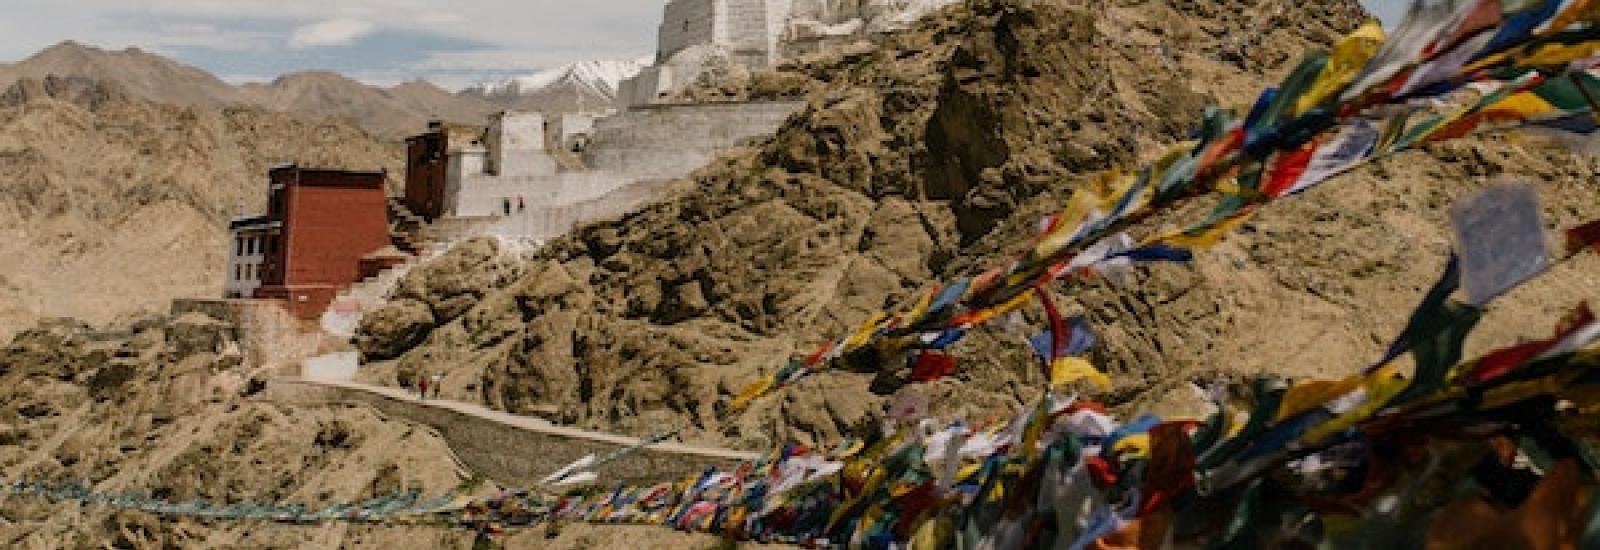 prayer flags of different sizes and colors on ropes flow in the wind fixed on both sides dominating the right side of the image with a series of white buildings cascading down the mountain or rock and dirt and a brown building at the bottom with blue sky and white  feather clouds